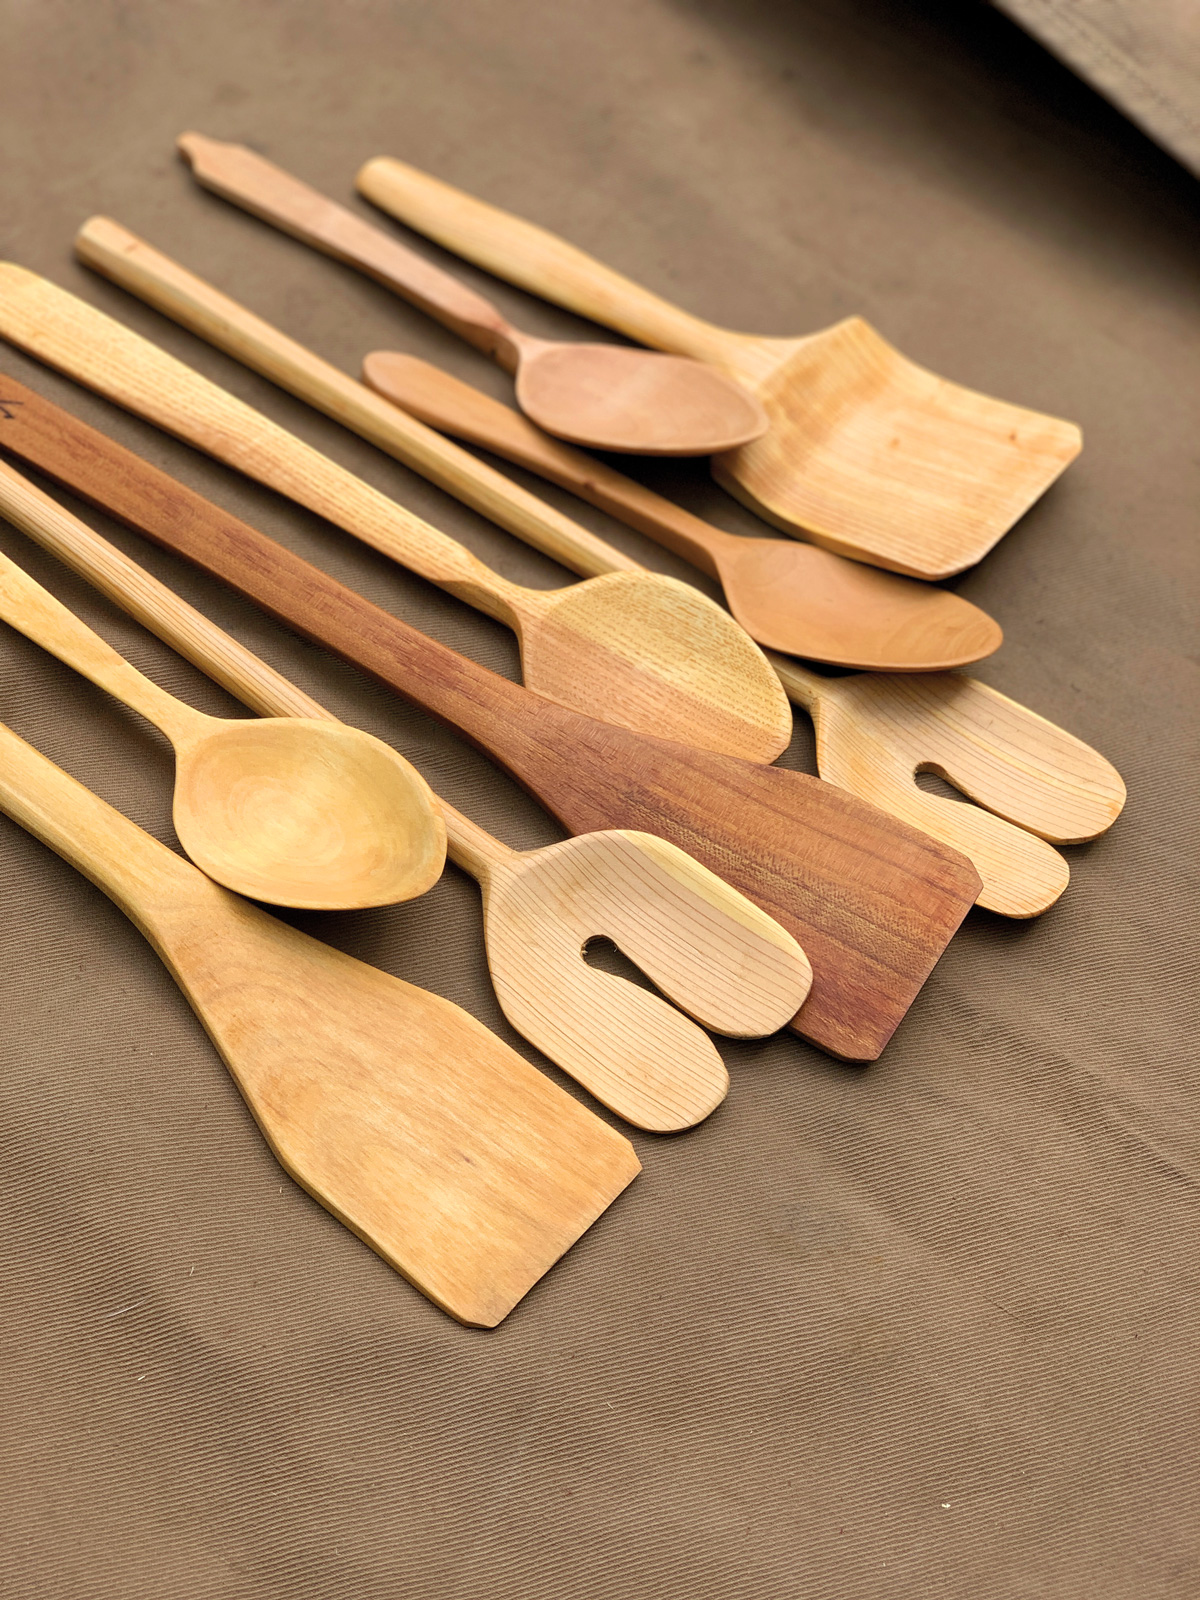 wooden spoons of different sizes and shapes lay on a wooden surface